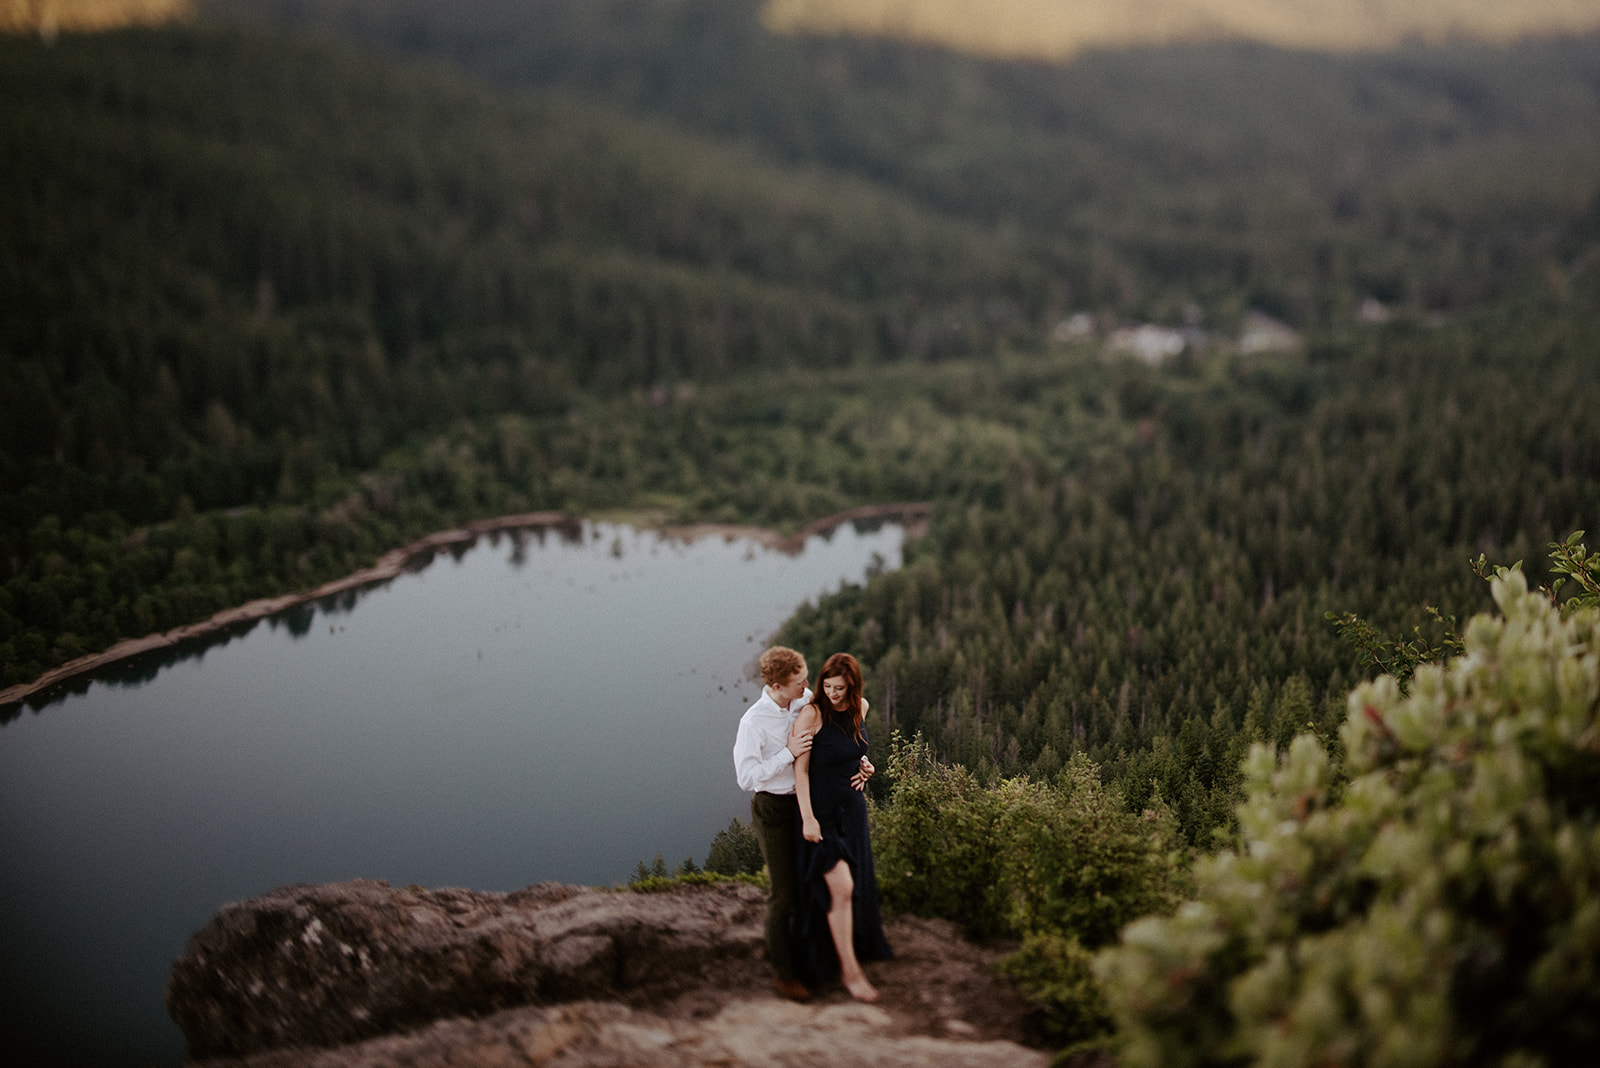 A couple standing on a cliff, surrounded by lush forest and overlooking a serene lake.